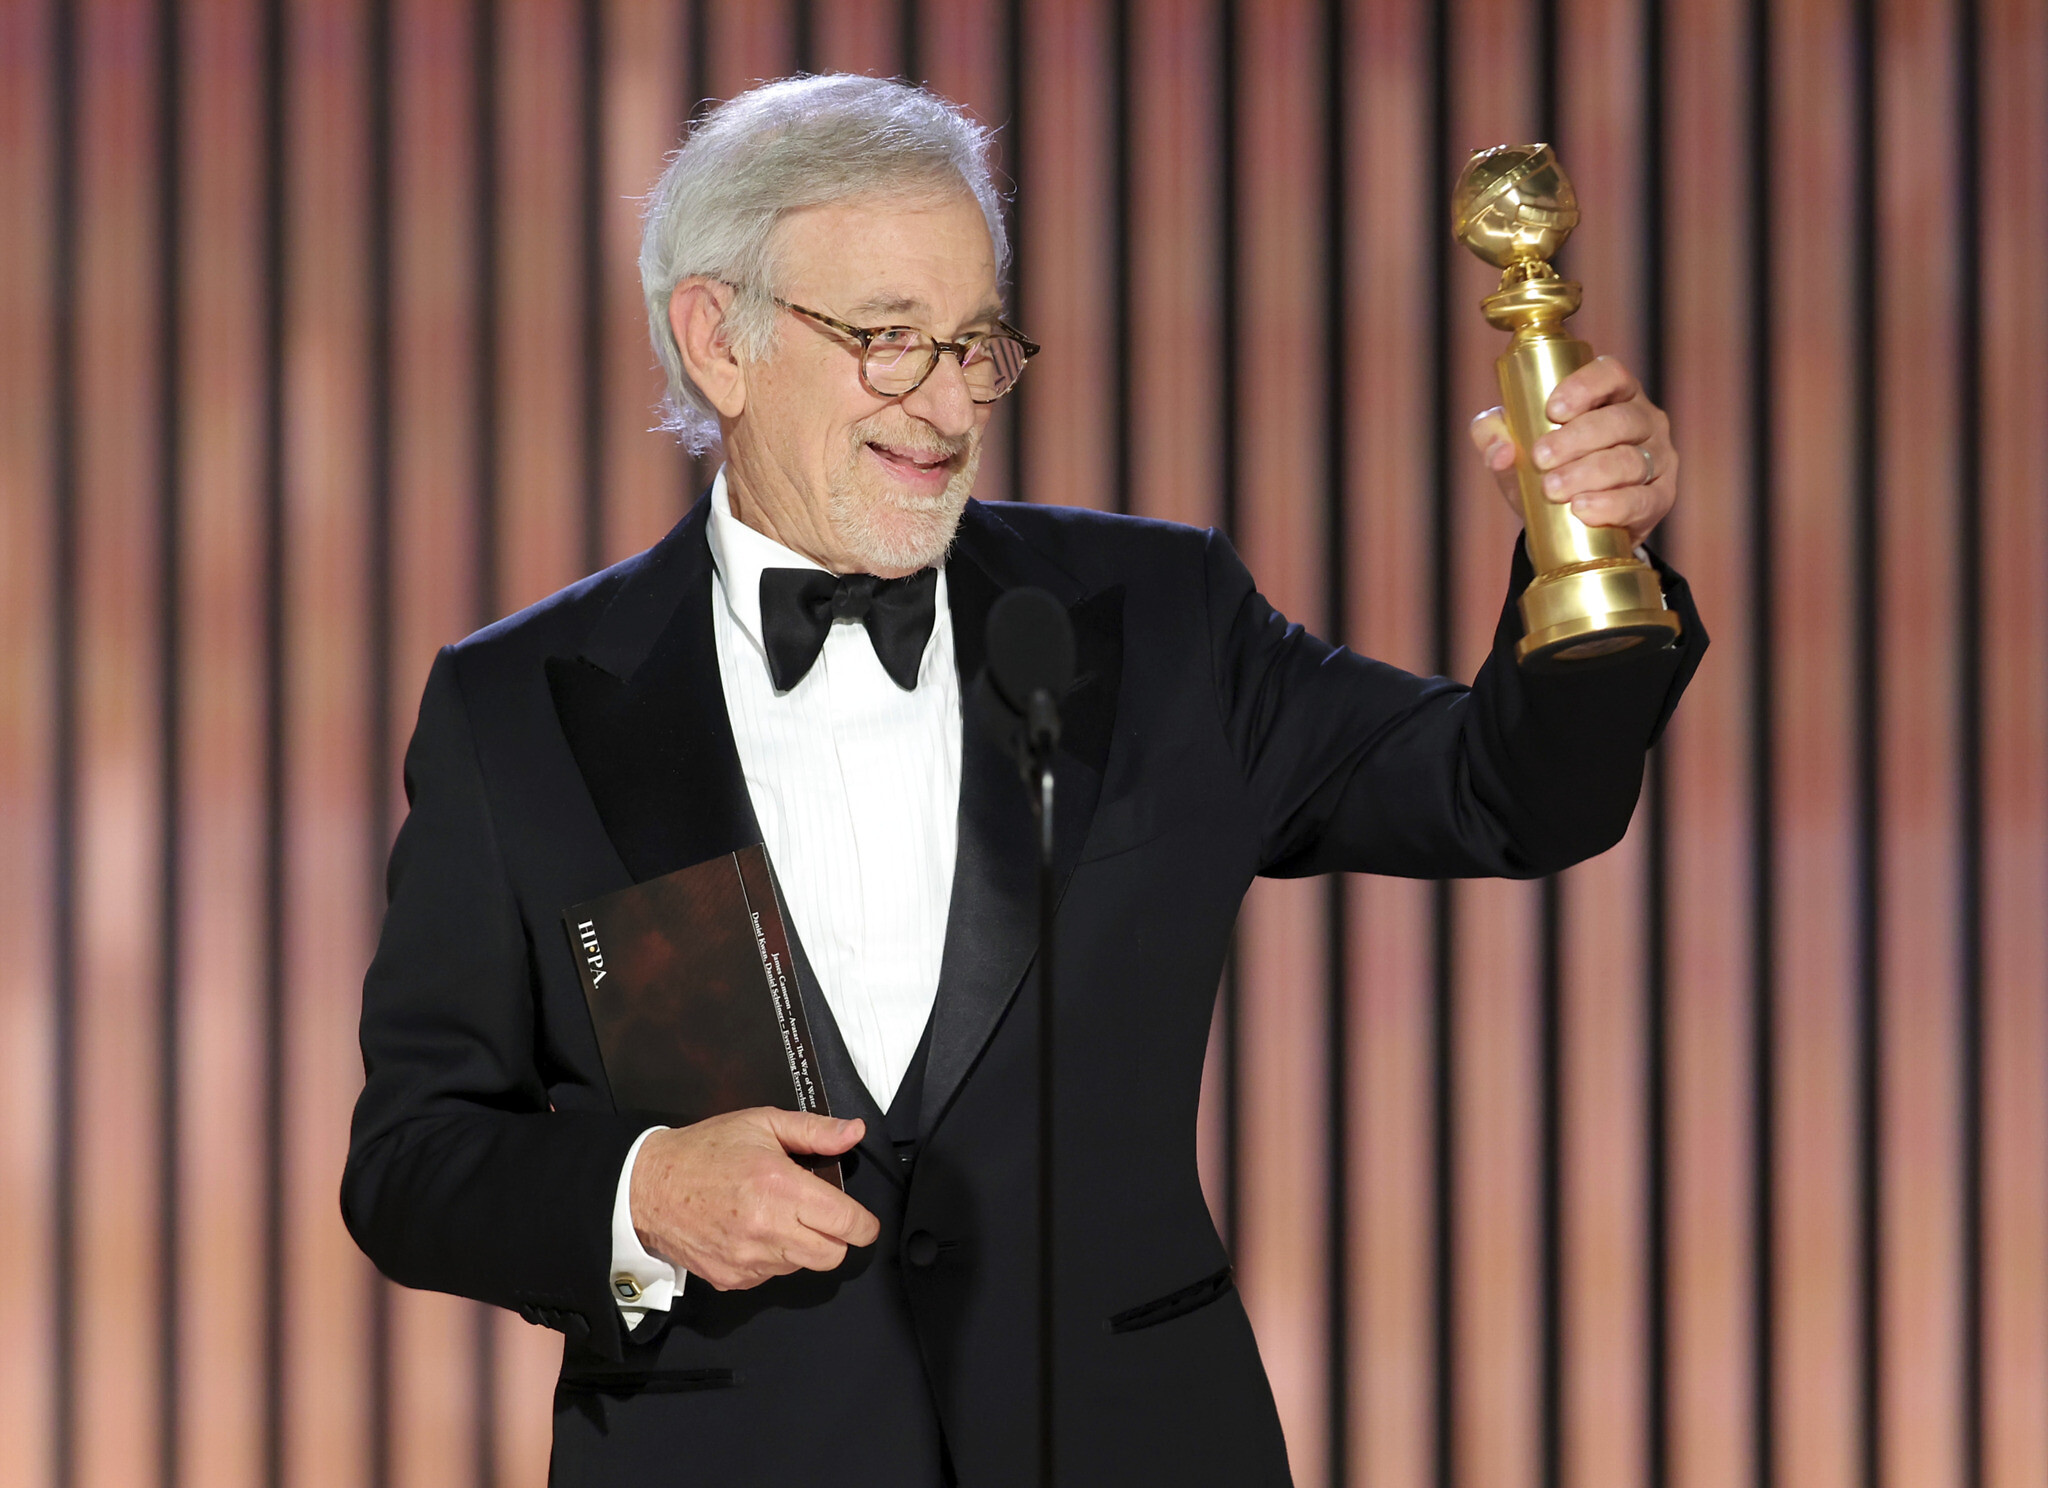 Steven Spielberg's 'The Fabelmans' wins best drama at Golden Globes | The Times of Israel